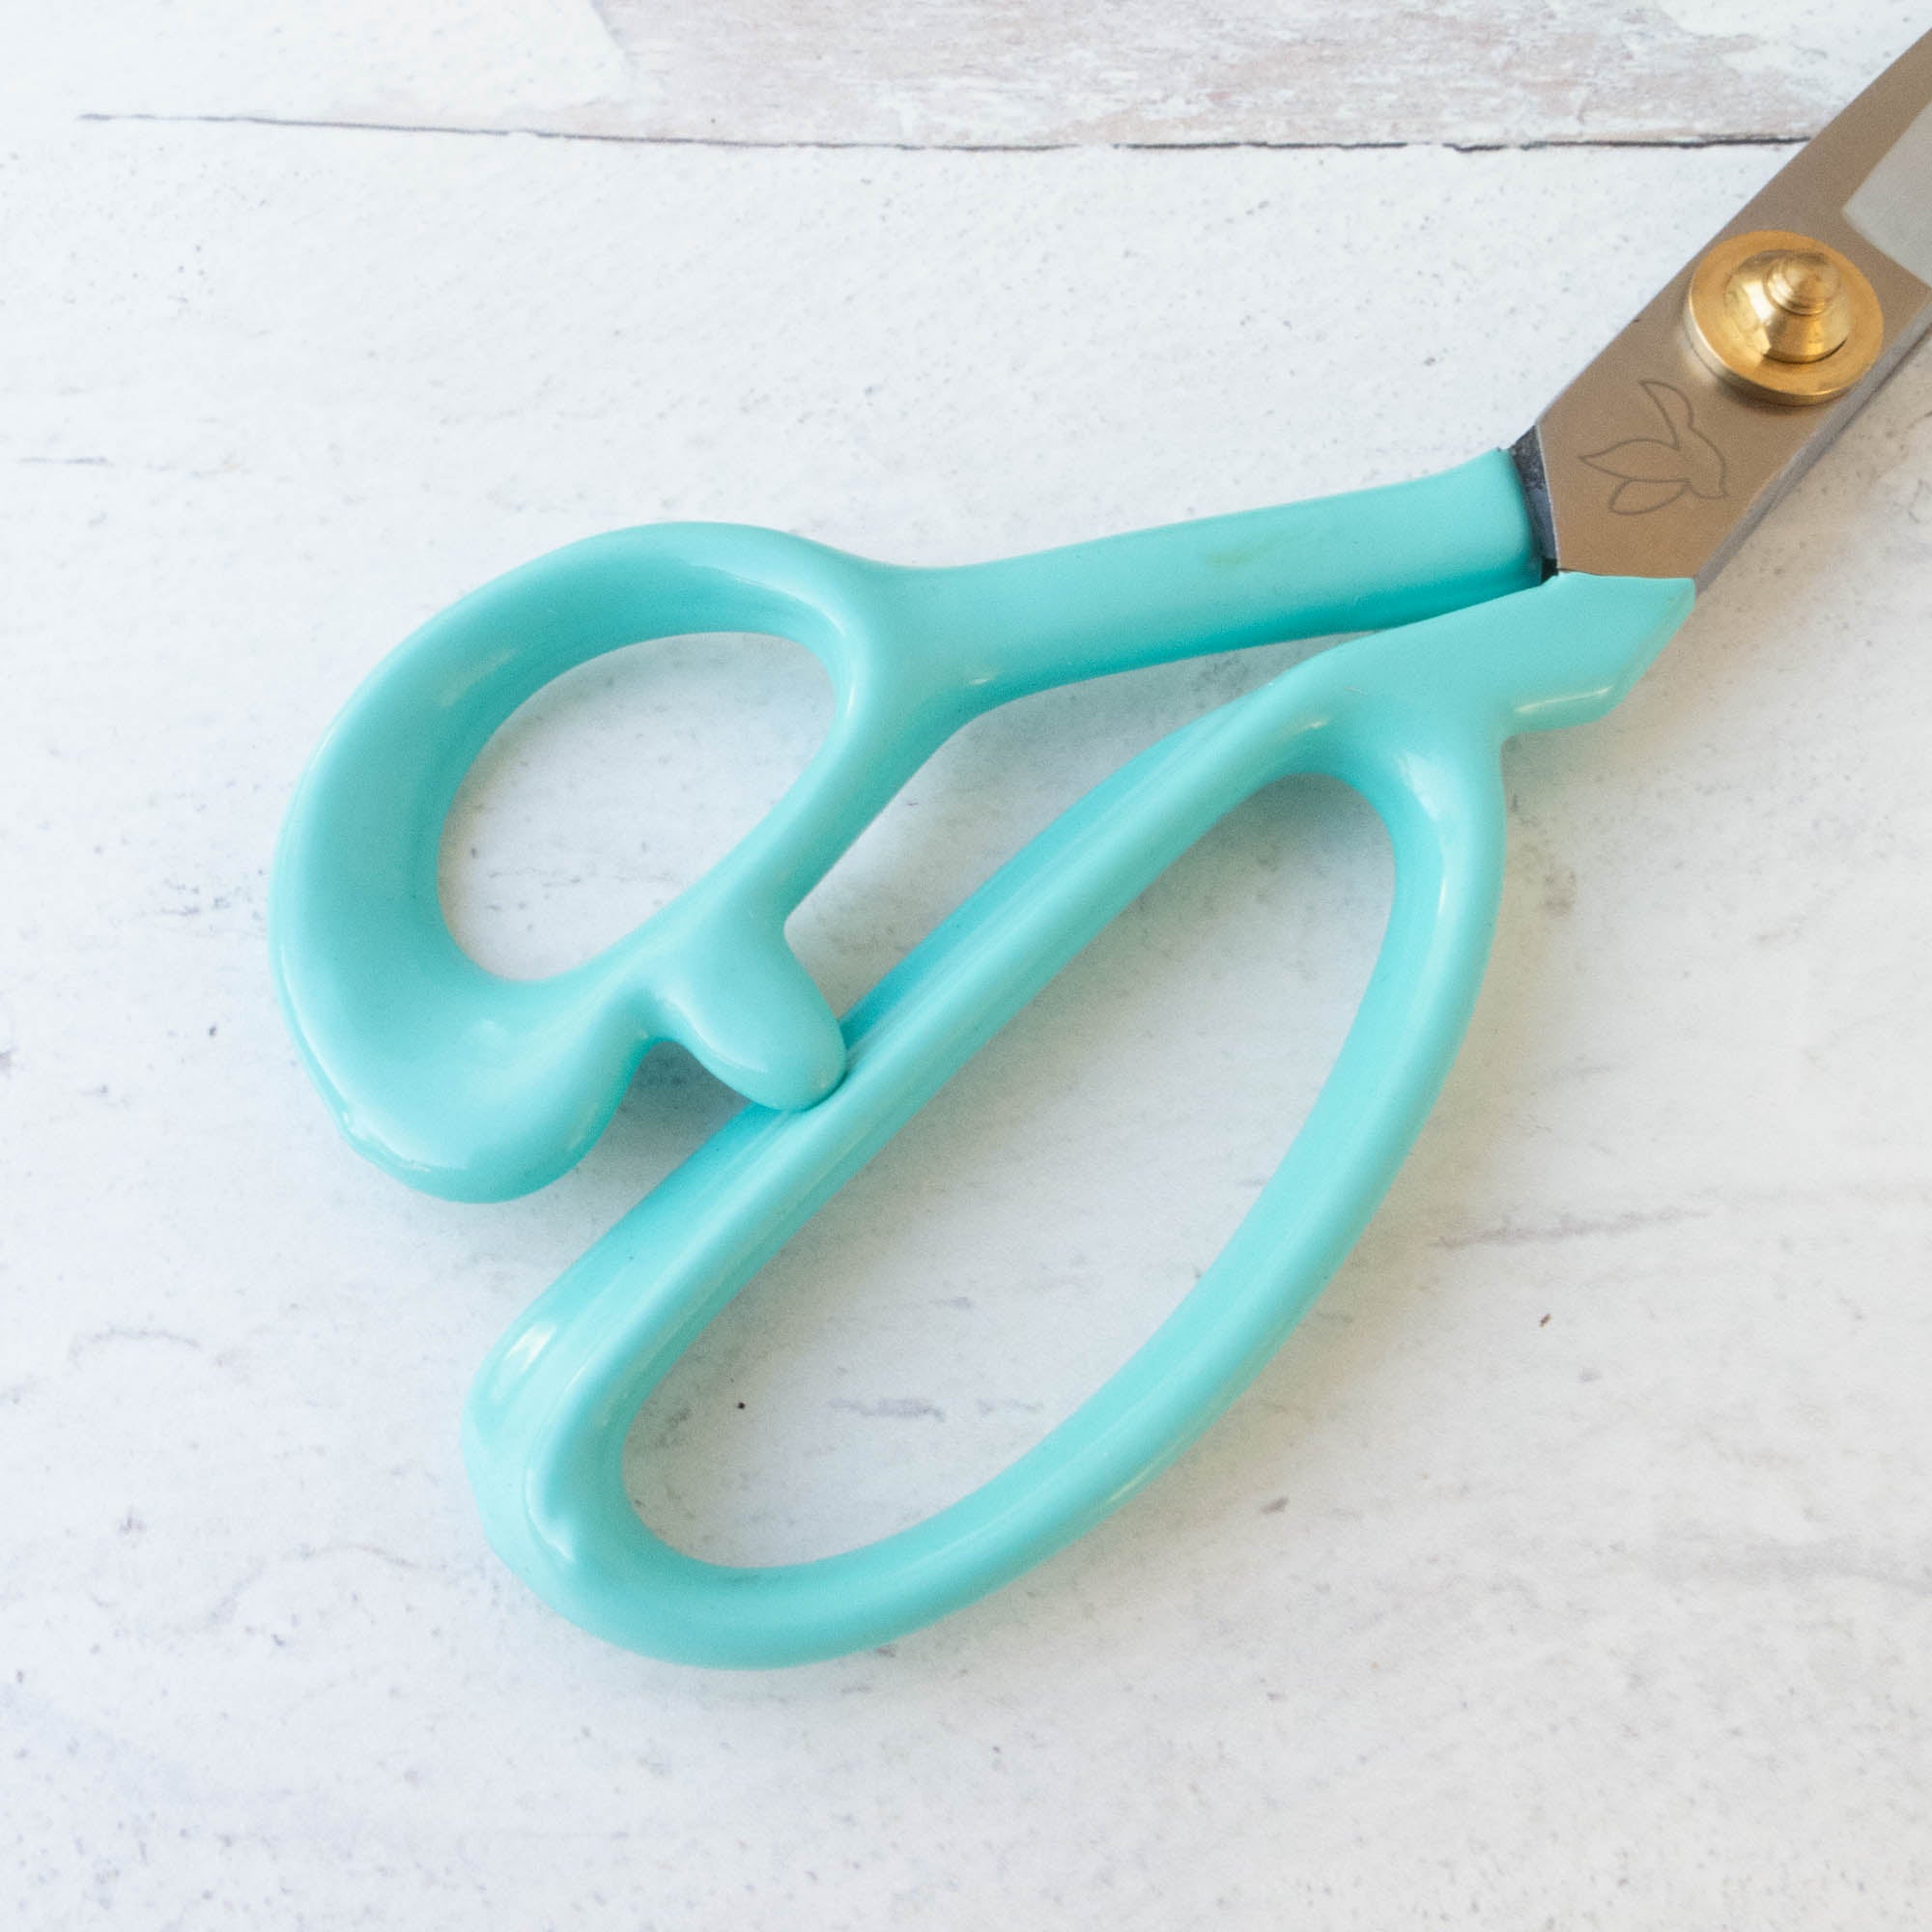 8 inch Teal Sewing Shears – Snuggly Monkey